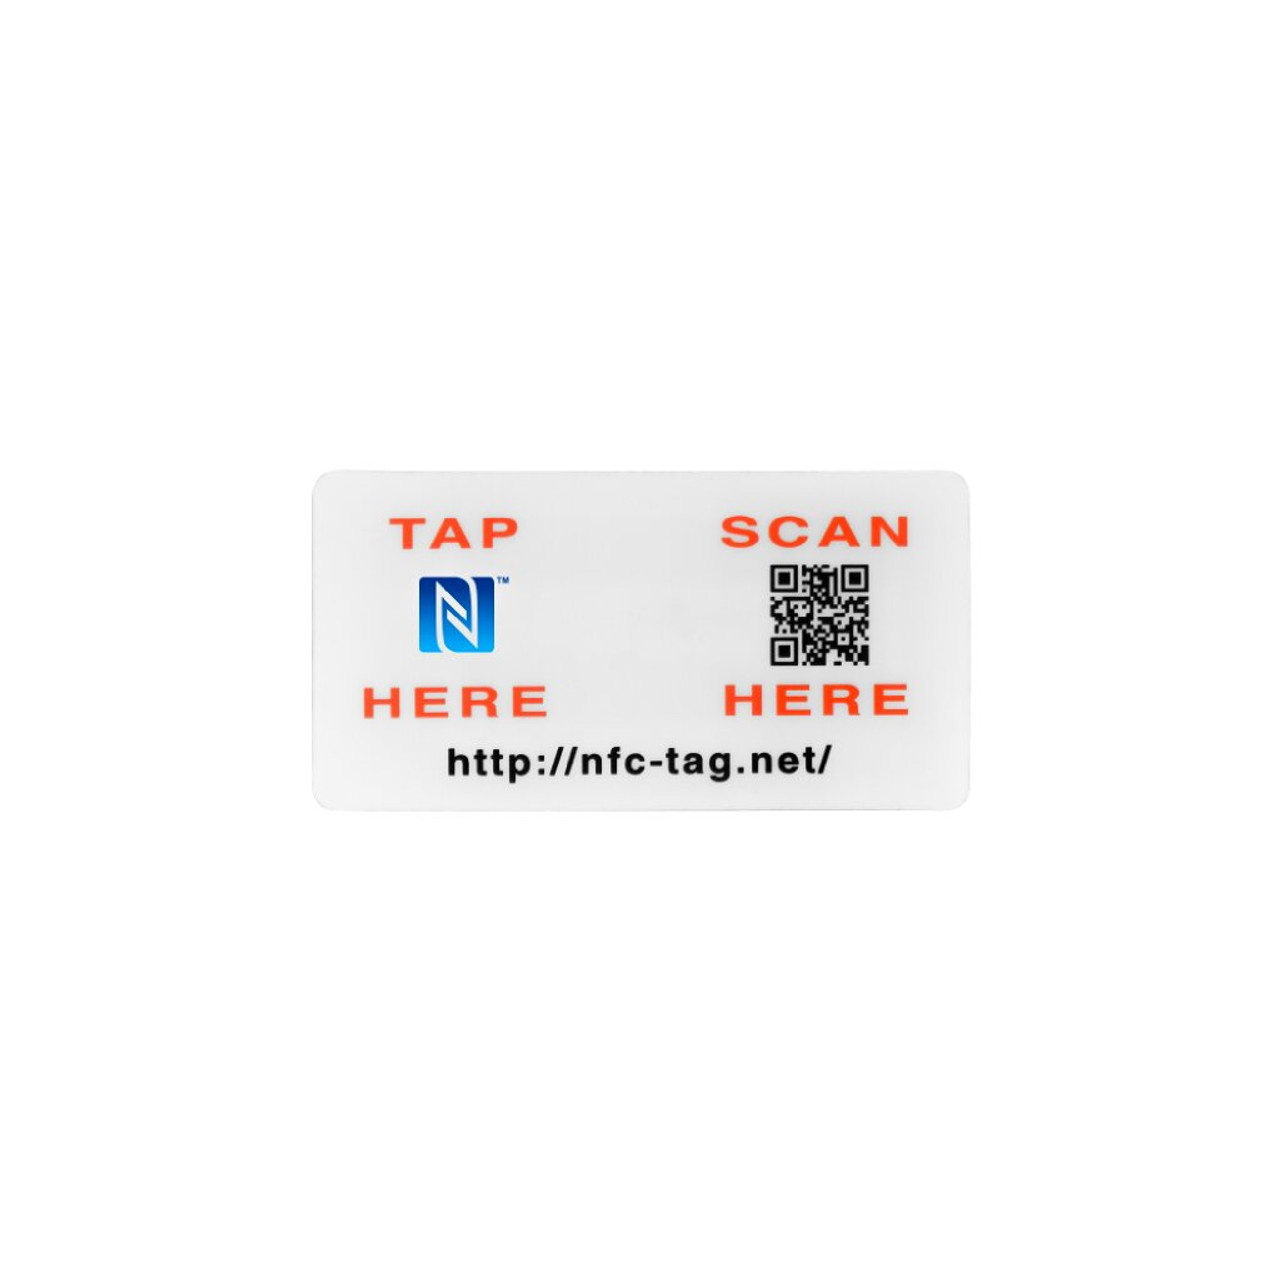 Buy NFC Tags, UHF RFID Tags, Barcodes and Hardware for Connected Things